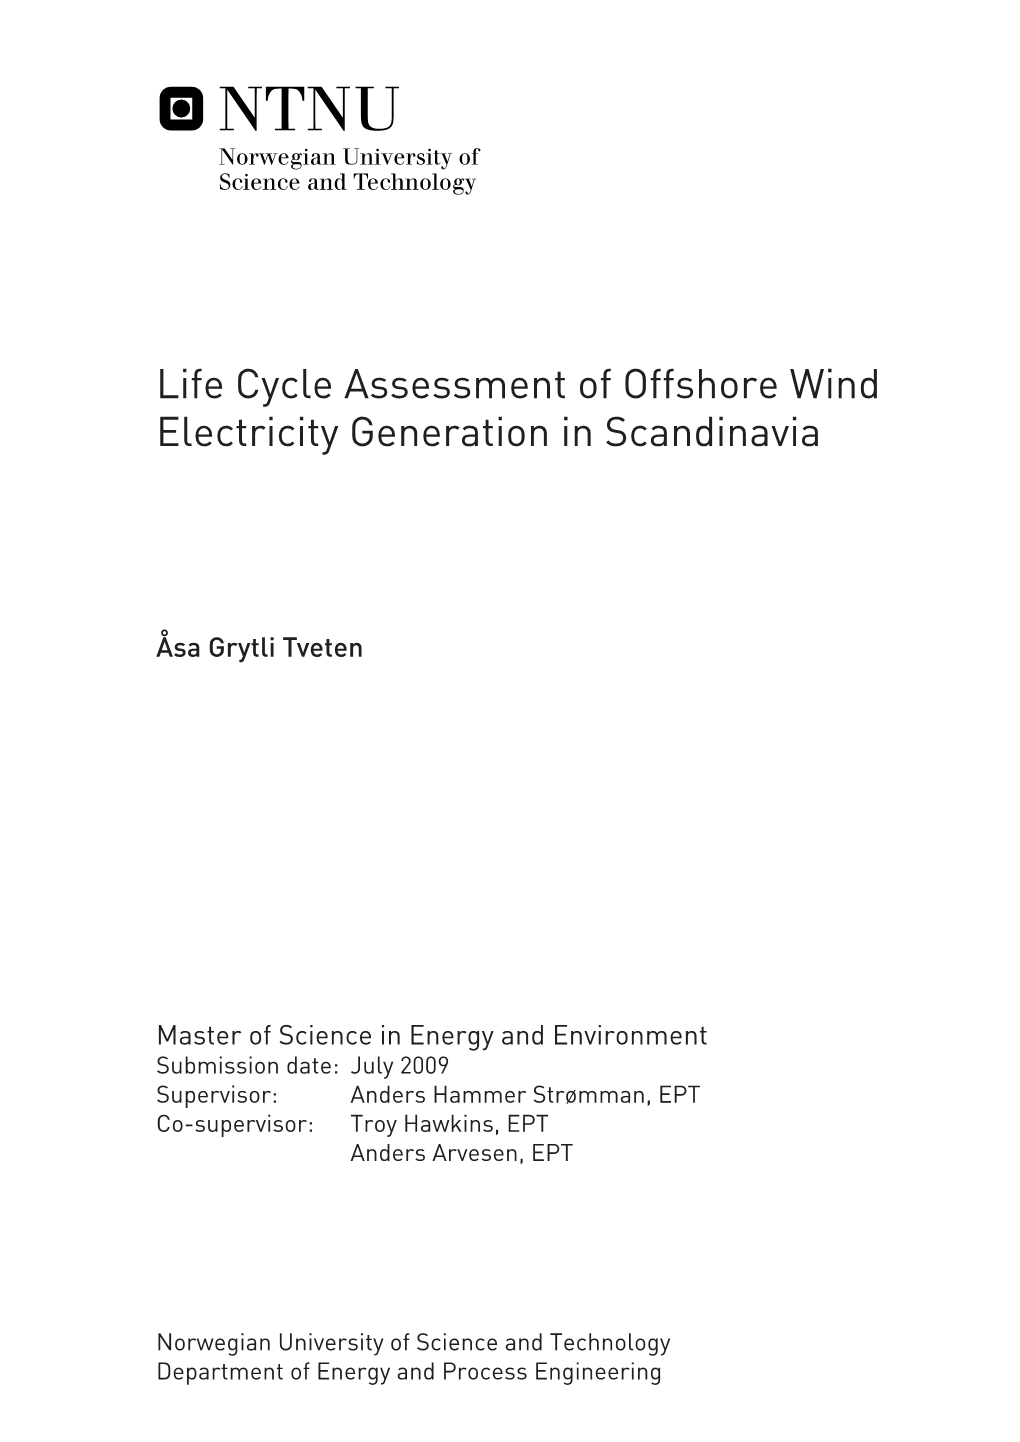 Life Cycle Assessment of Offshore Wind Electricity Generation in Scandinavia